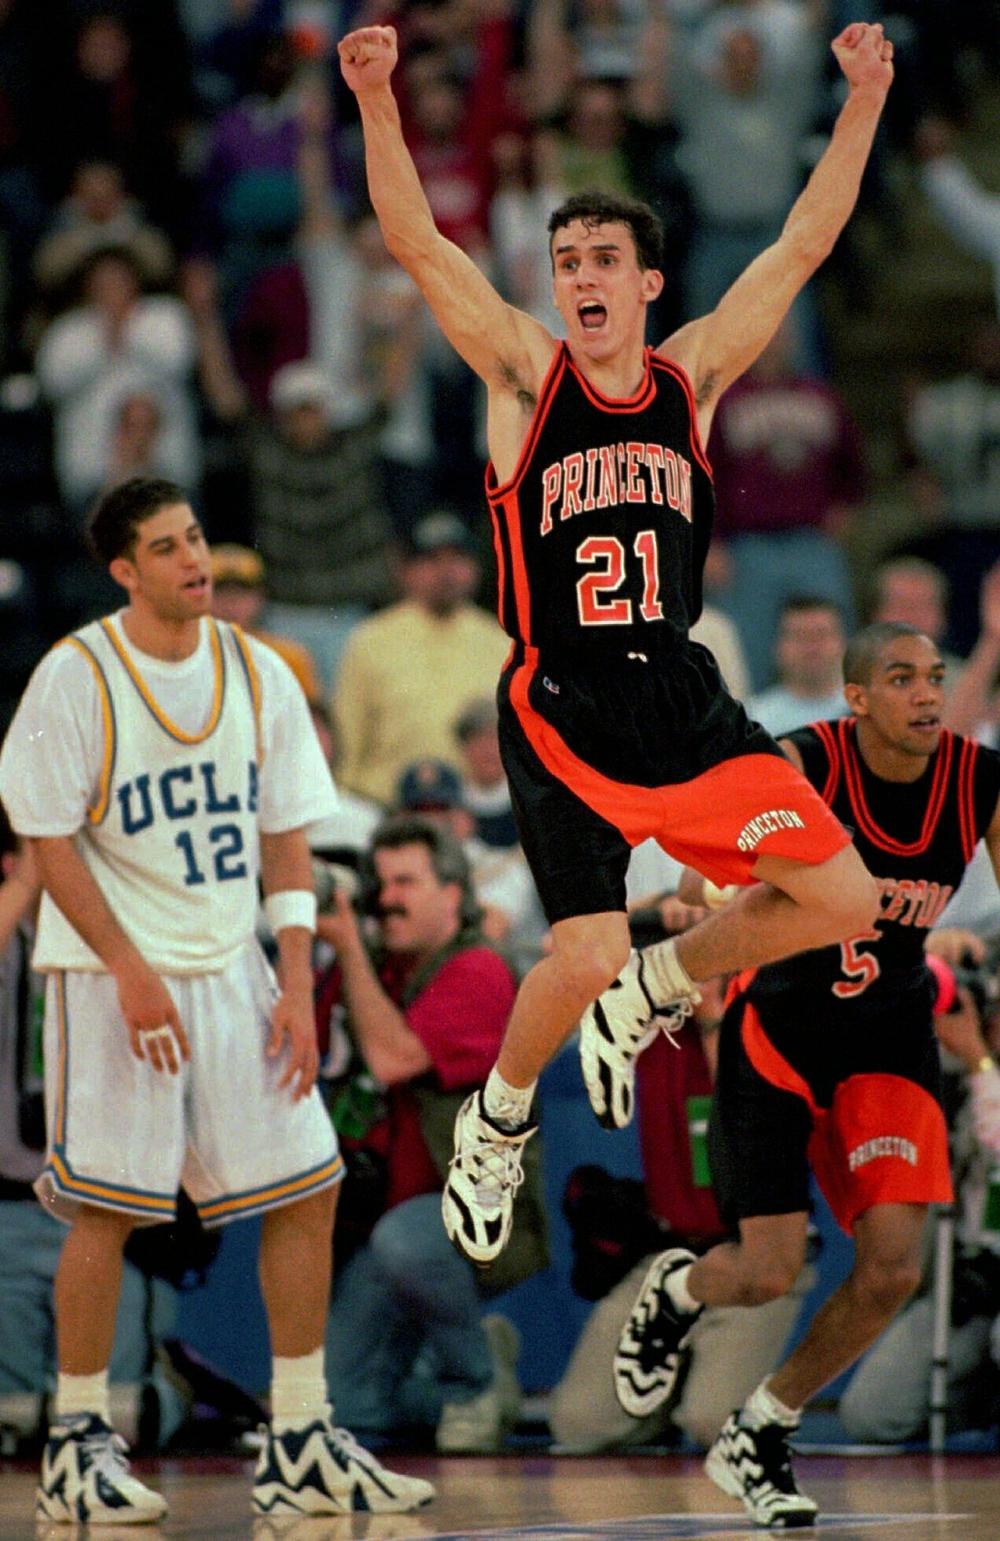 March 14, 1996: Princeton guard Mitch Henderson leaps to celebrate the Tigers' victory over UCLA as Bruins guard Toby Bailey, left, looks on in the first round of the NCAA tournament. Henderson, now a coach, has Princeton in the Sweet 16.